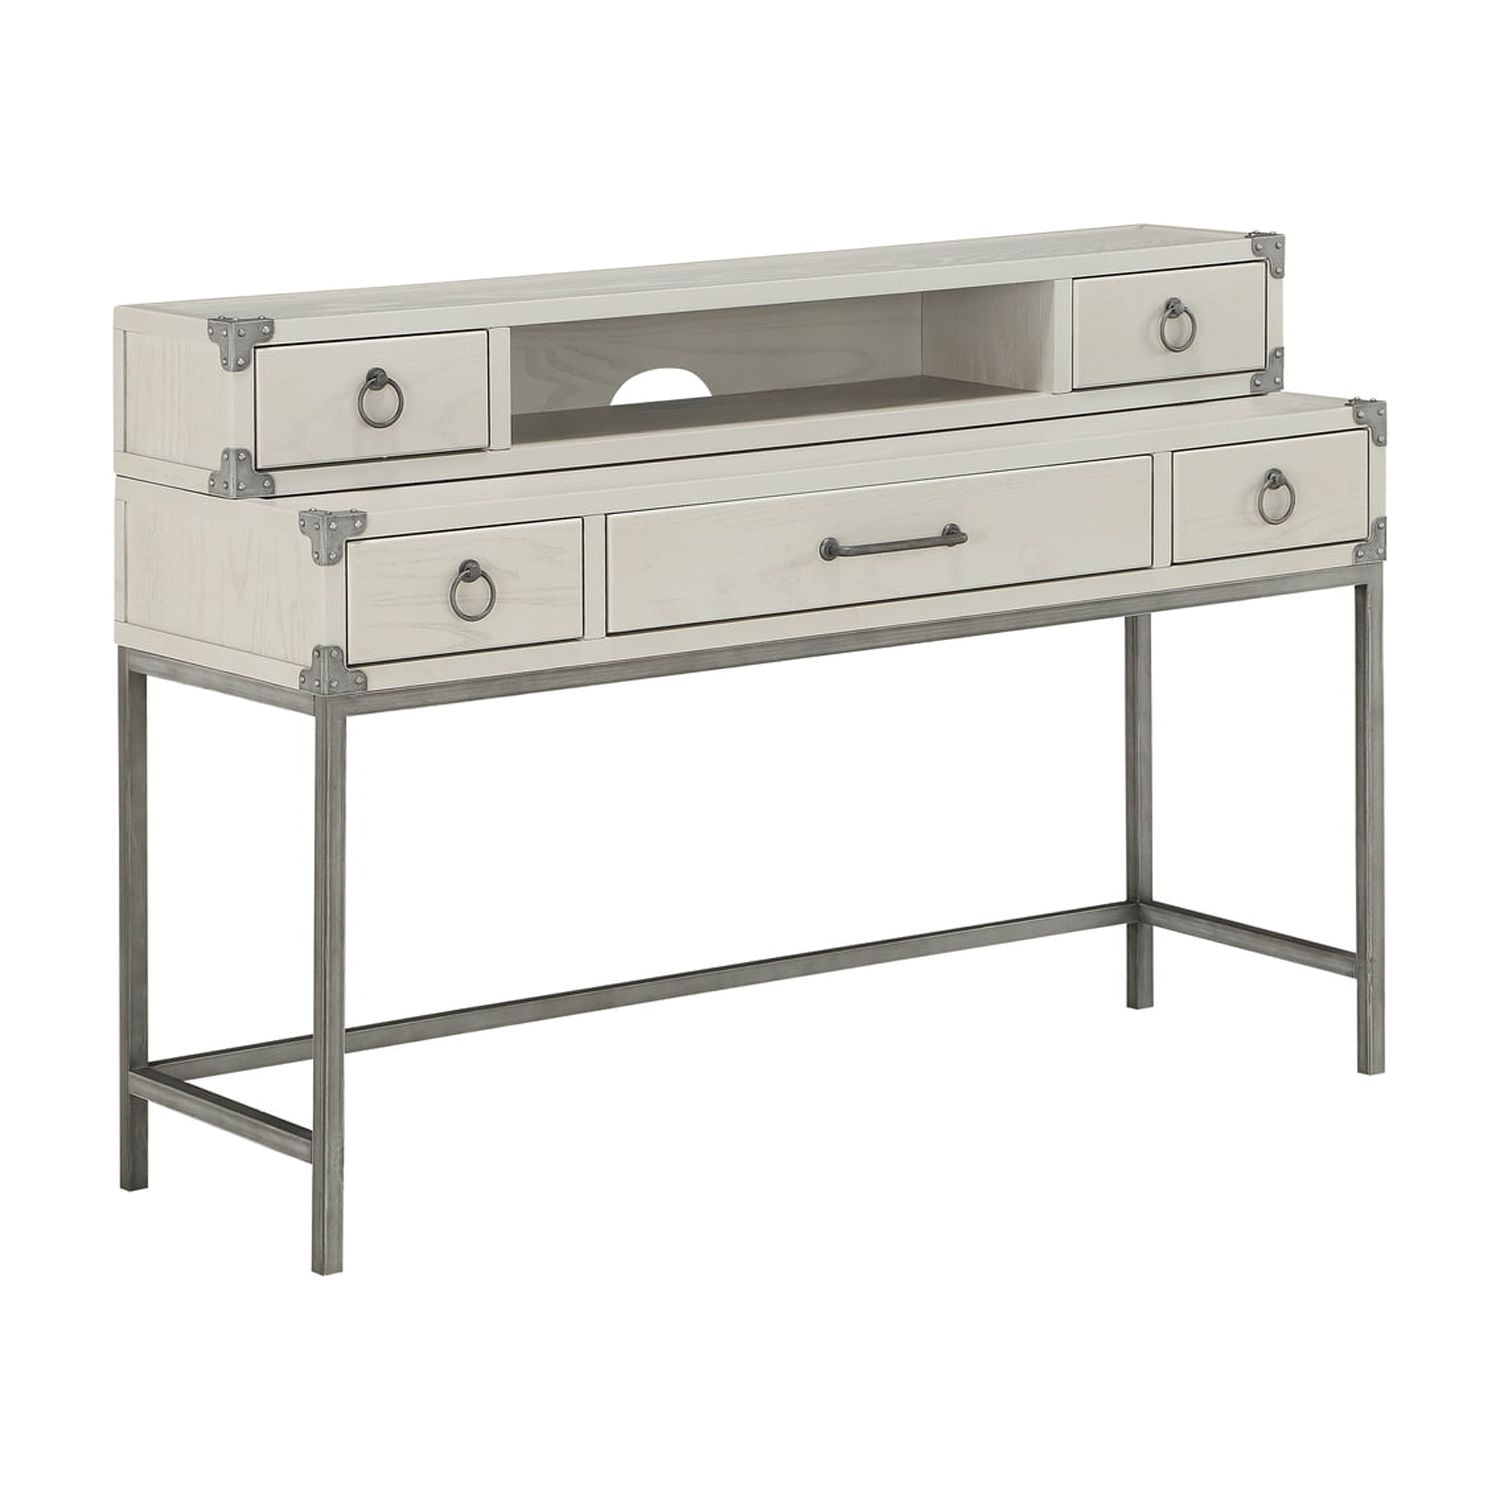 Picture of ACME Furniture 36142 54 x 18 x 30 in. Orchest Desk, Gray